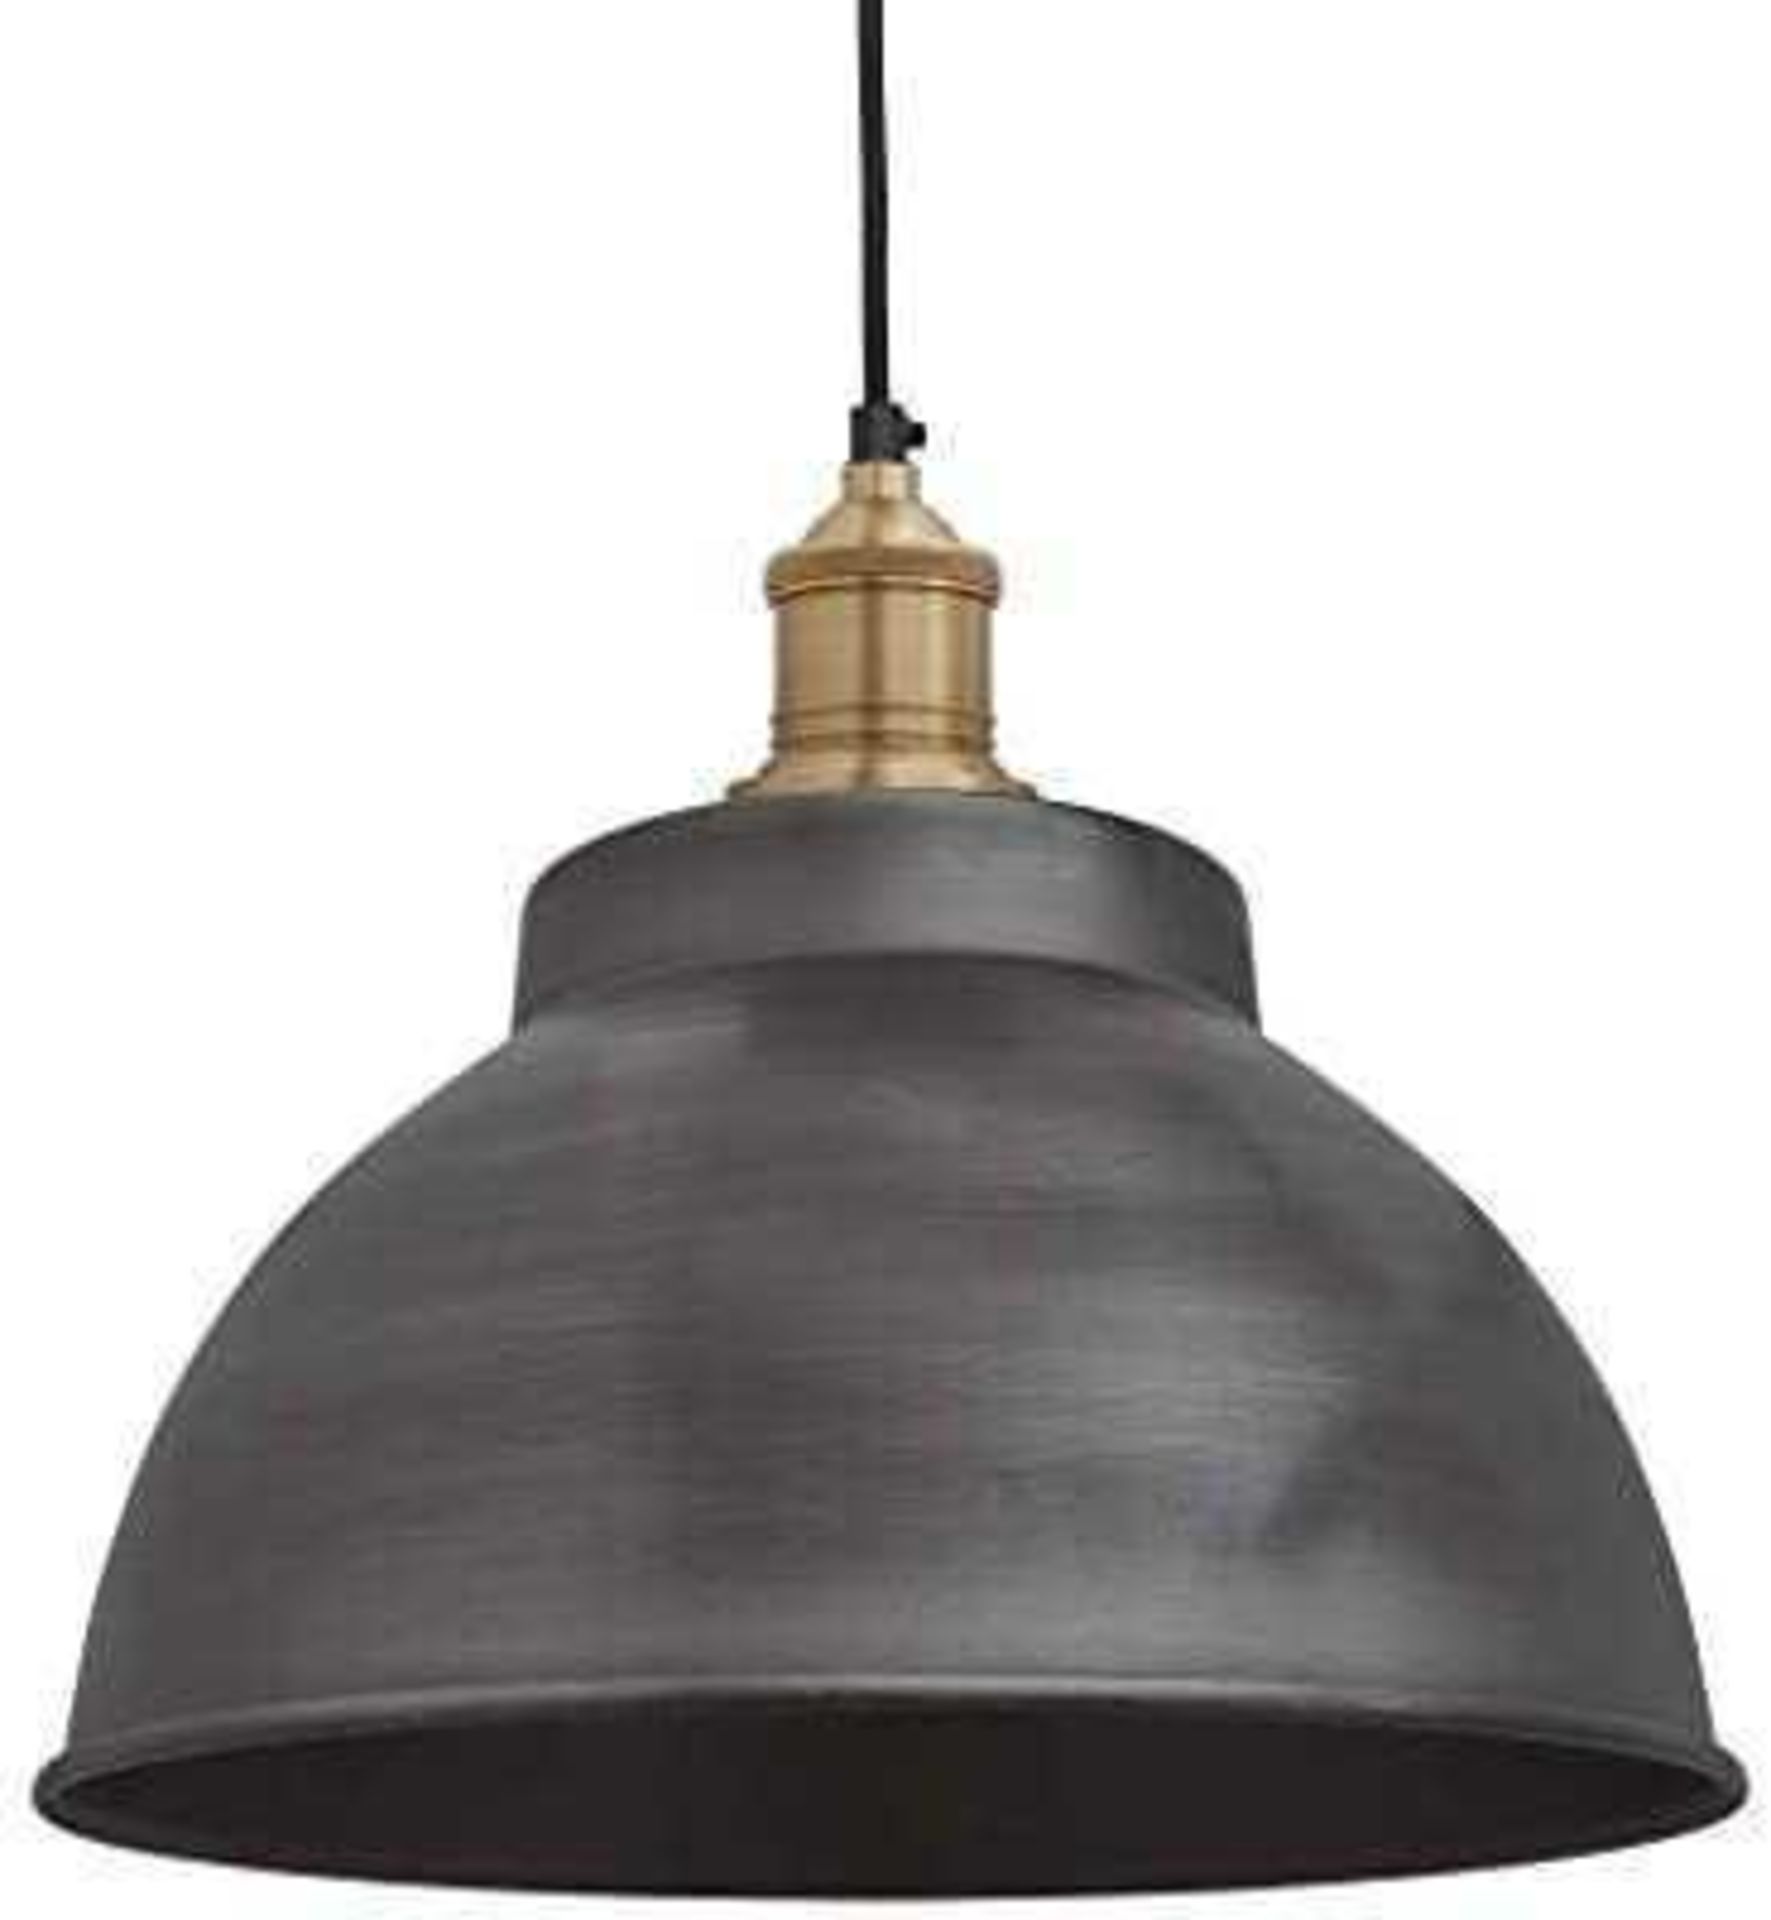 RRP £50 Boxed Industville Brilliant Ceiling Light - Image 2 of 3